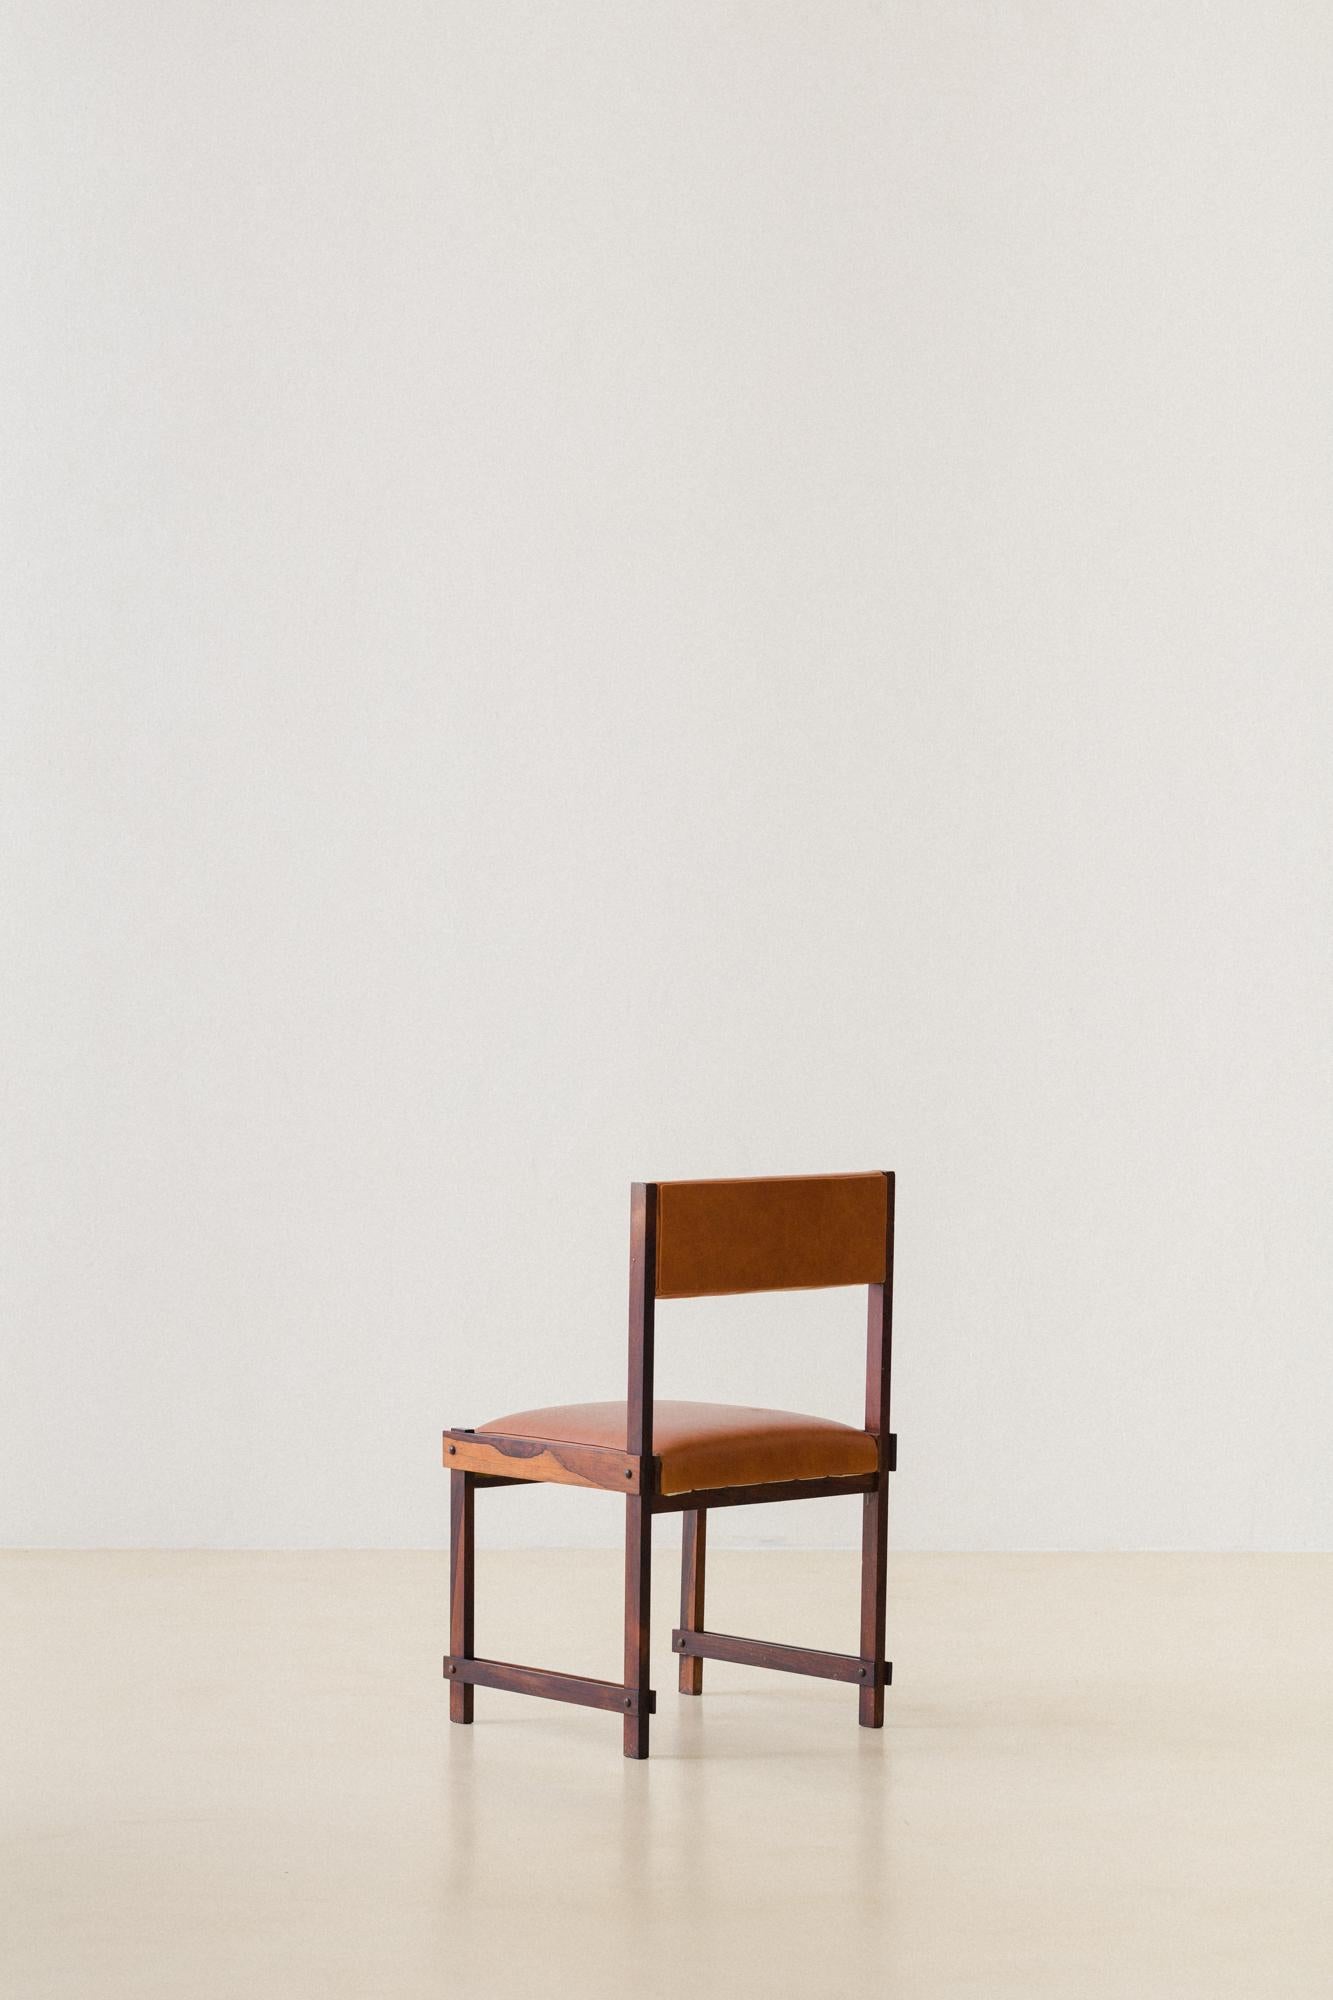 Brazilian Rosewood Dining Chairs by FAI 'Fatima Arquitetura Interiores', 1960s For Sale 3